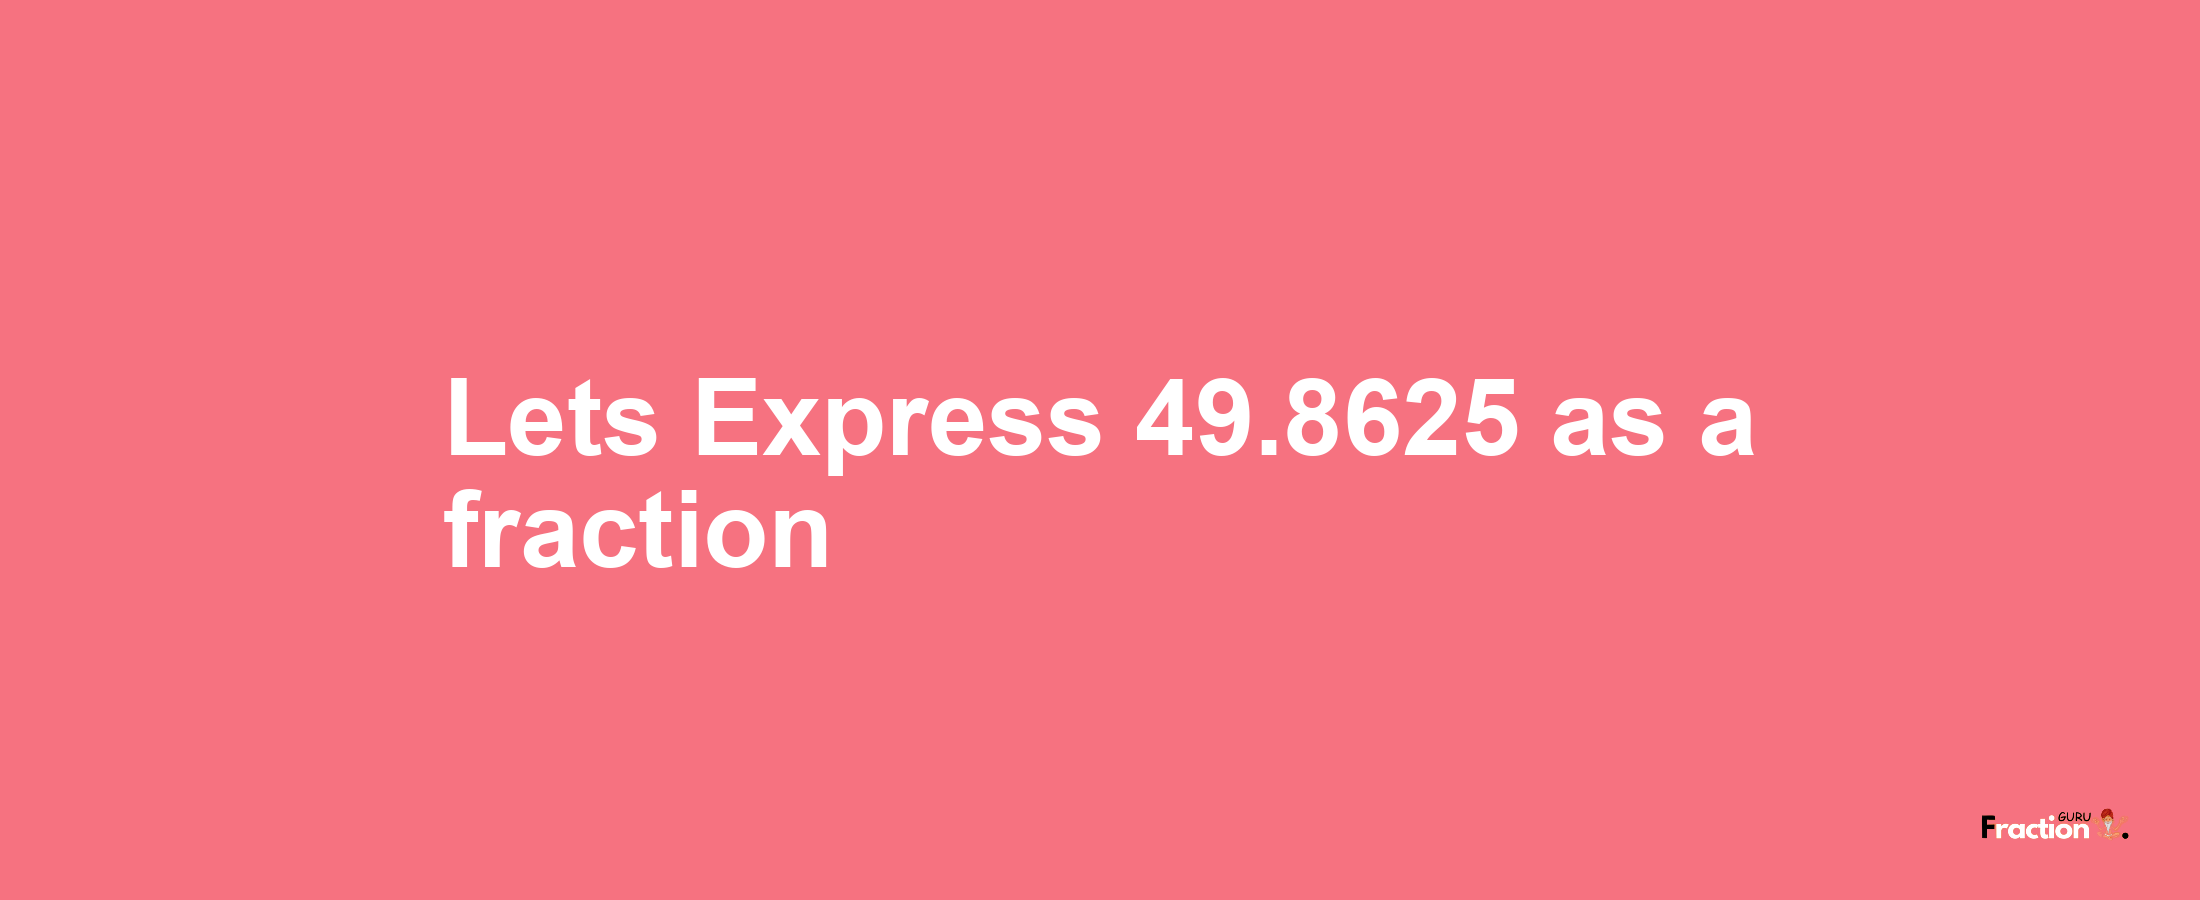 Lets Express 49.8625 as afraction